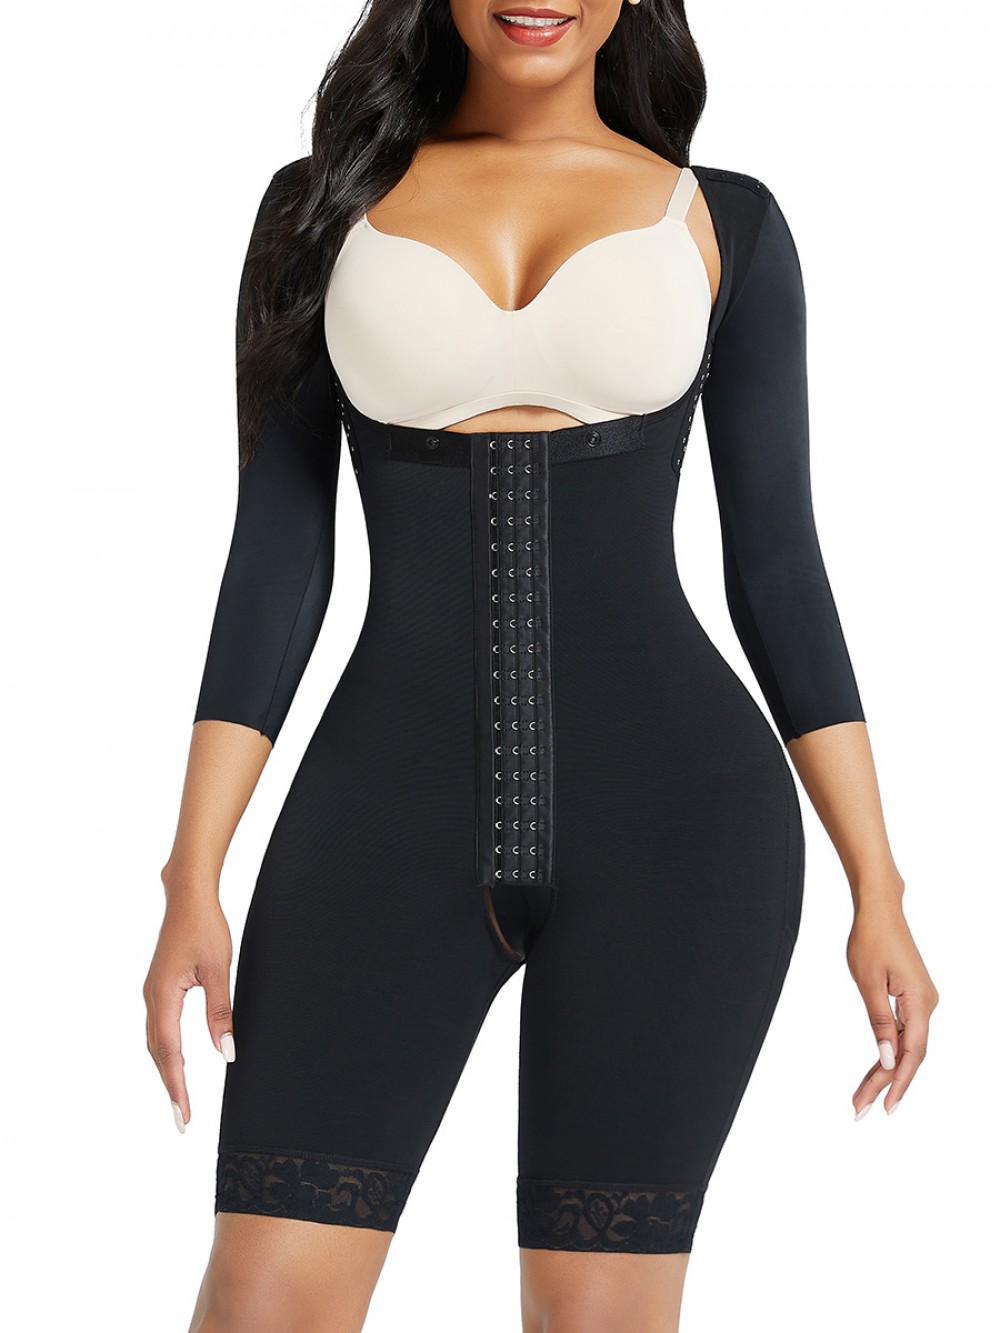 Black Lace Trim Hourglass Body Shaper With Sleeves Flatten Tummy